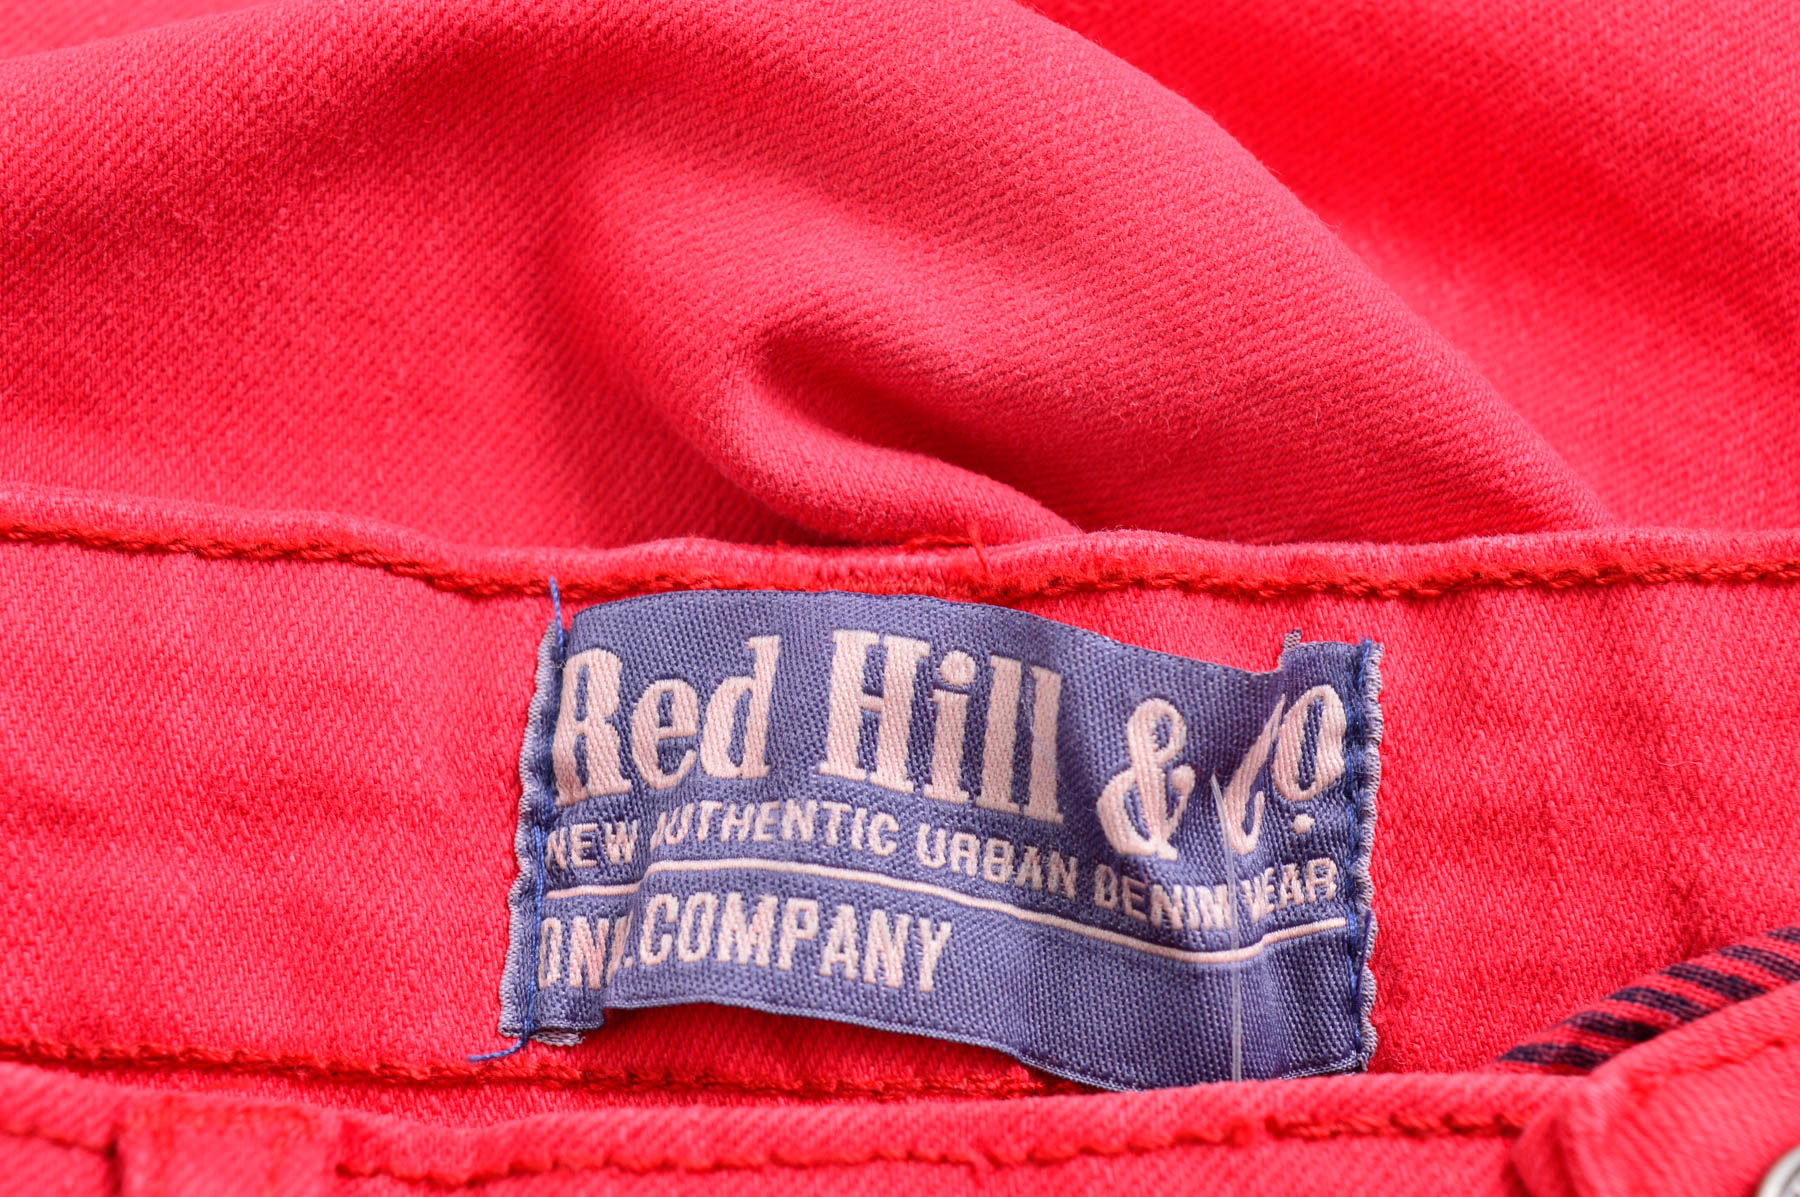 Men's trousers - Red Hill & Co. - 2